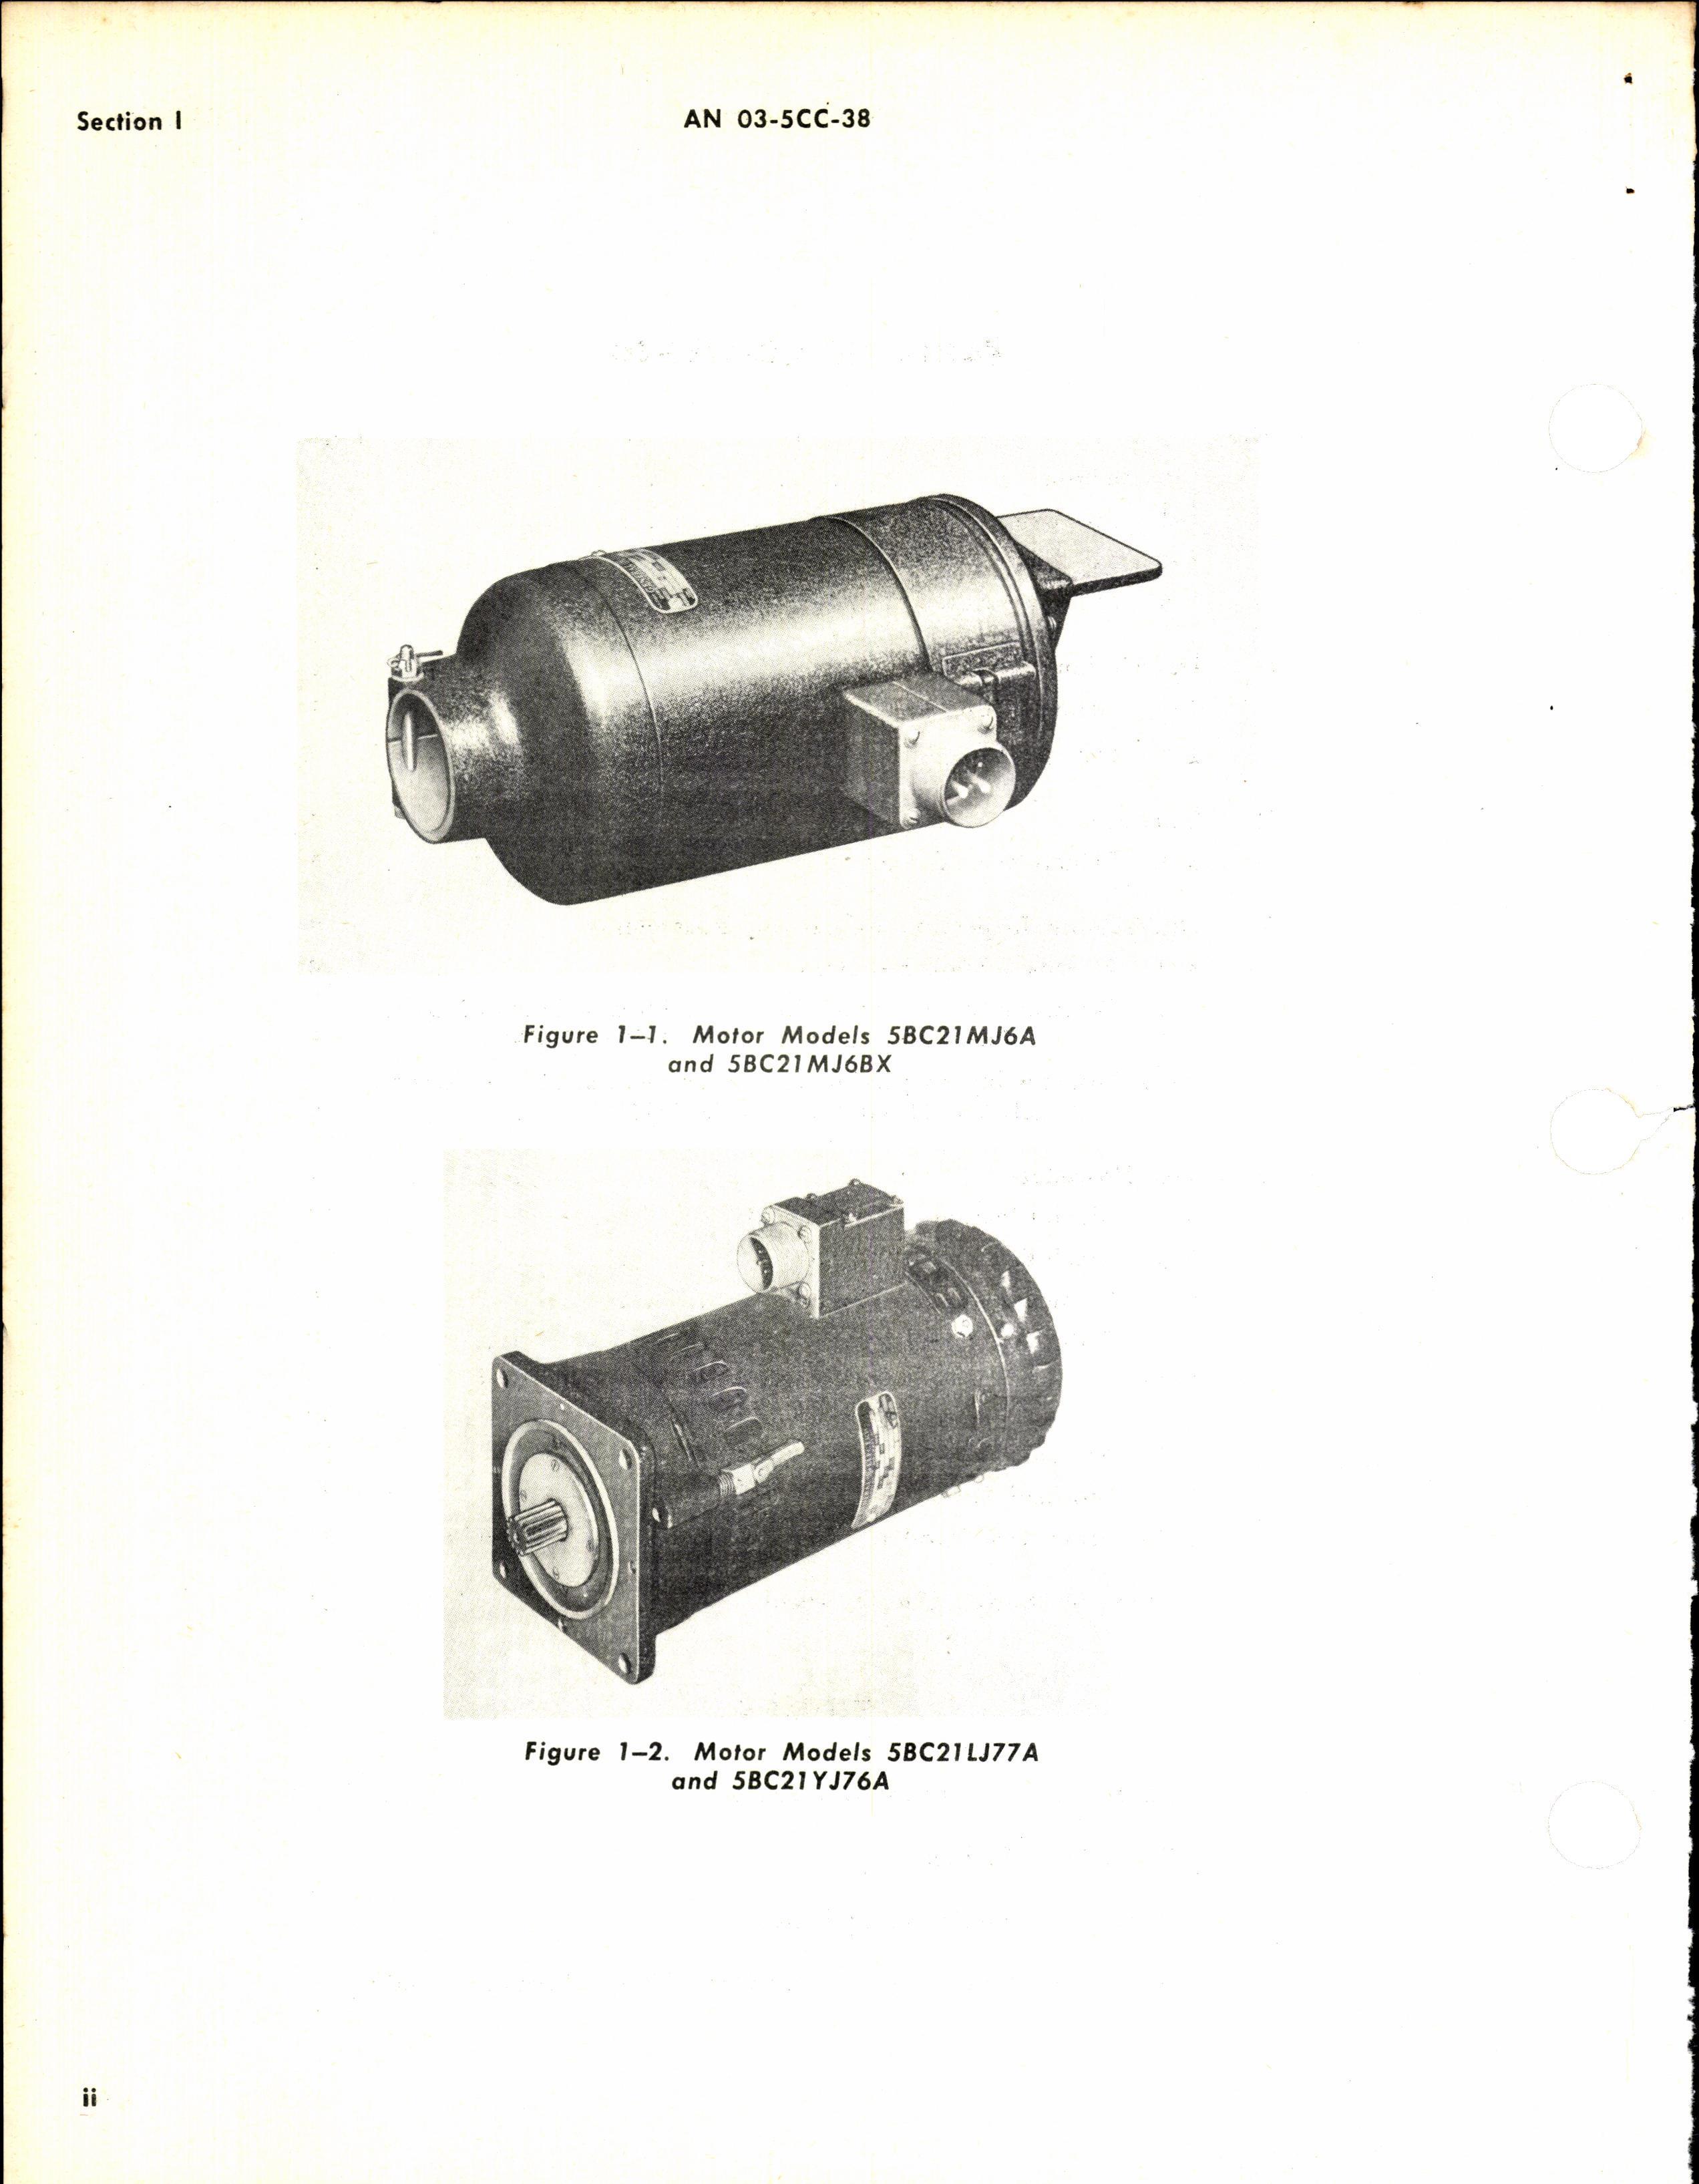 Sample page 4 from AirCorps Library document: Overhaul Instructions for General Electric Series 5BC21 Aircraft Motors